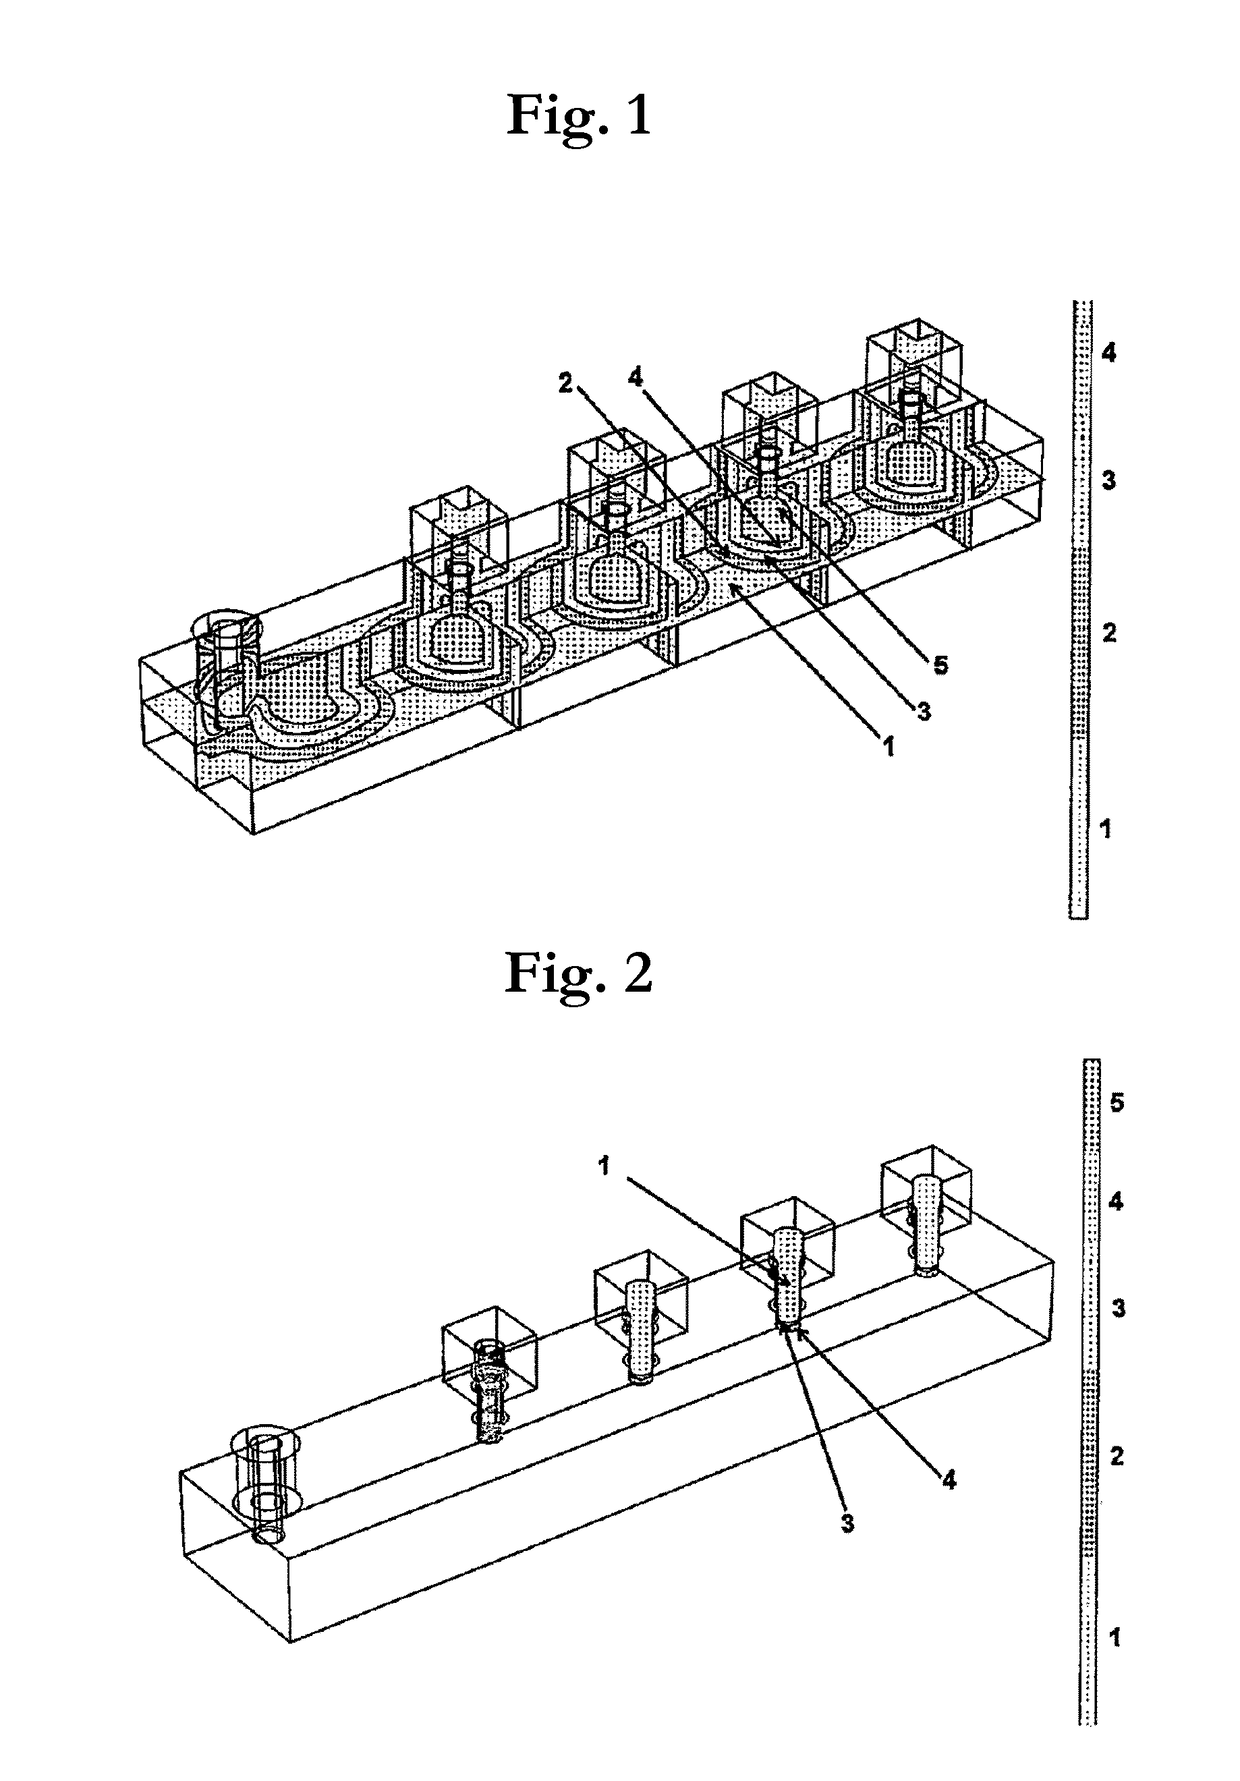 Apparatus and method for converting electromagnetic radiation into thermal energy